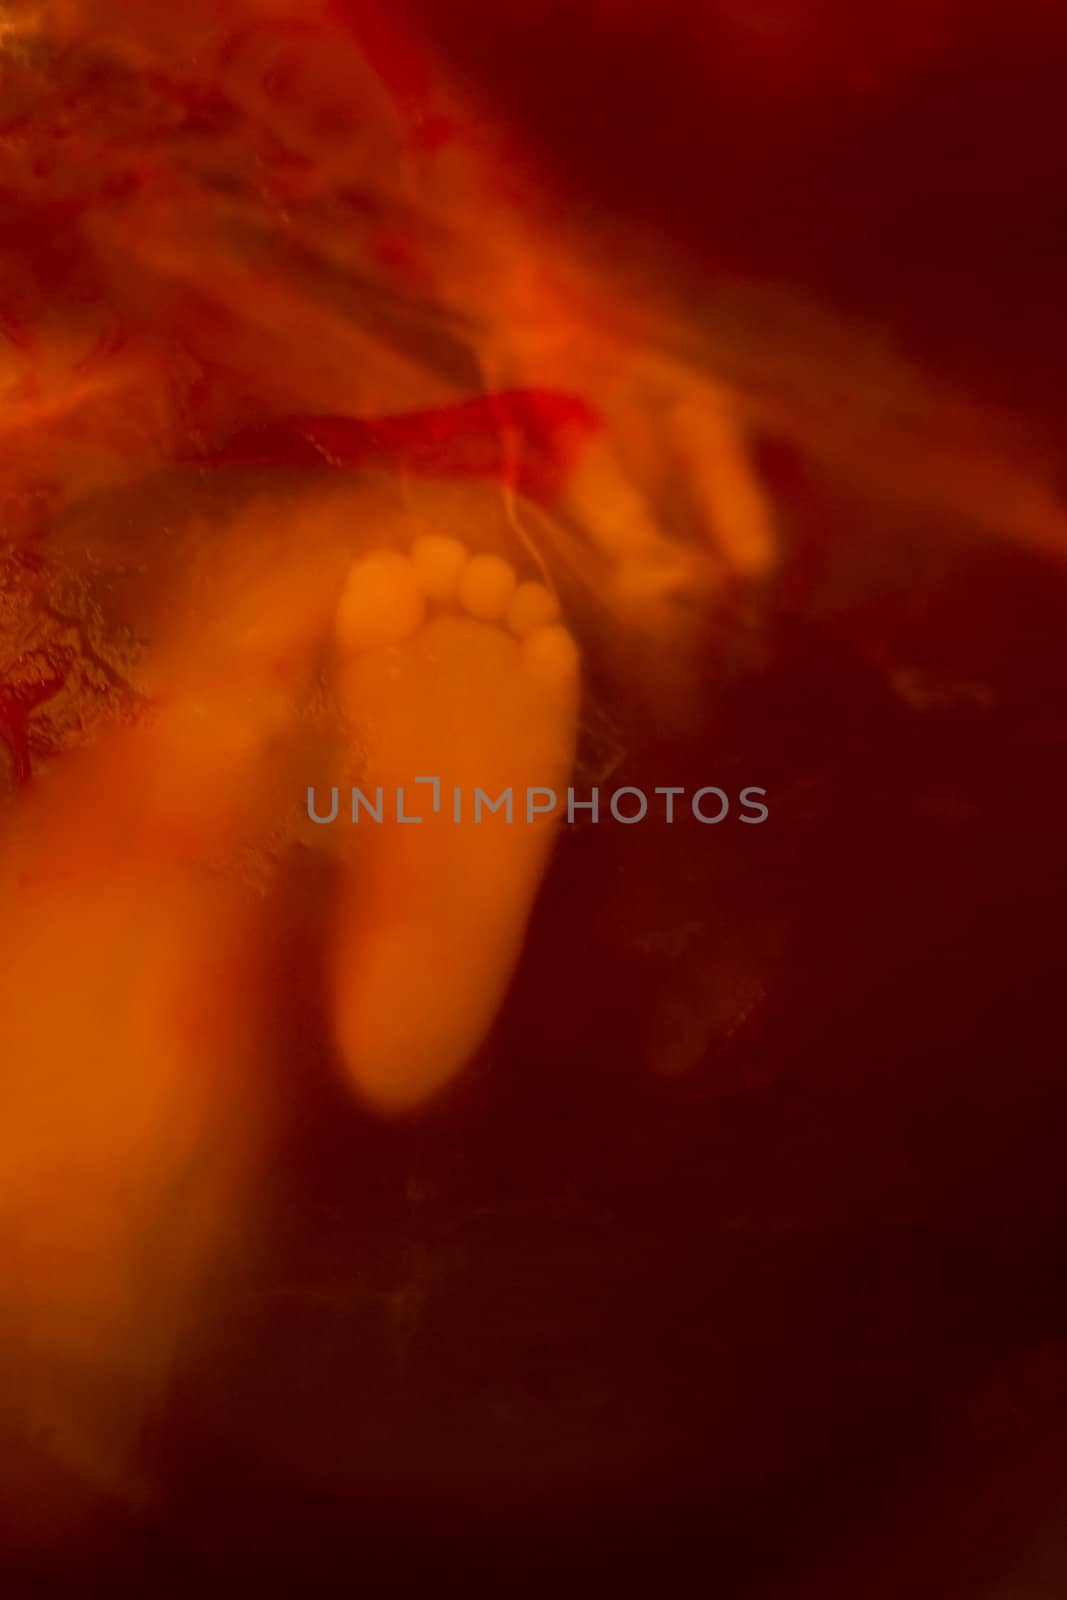 A shot of our premature stillborn son just after giving birth to him at home. I understand this image may not be agreeable to some but as an artist, photographer and father I find it captivating.